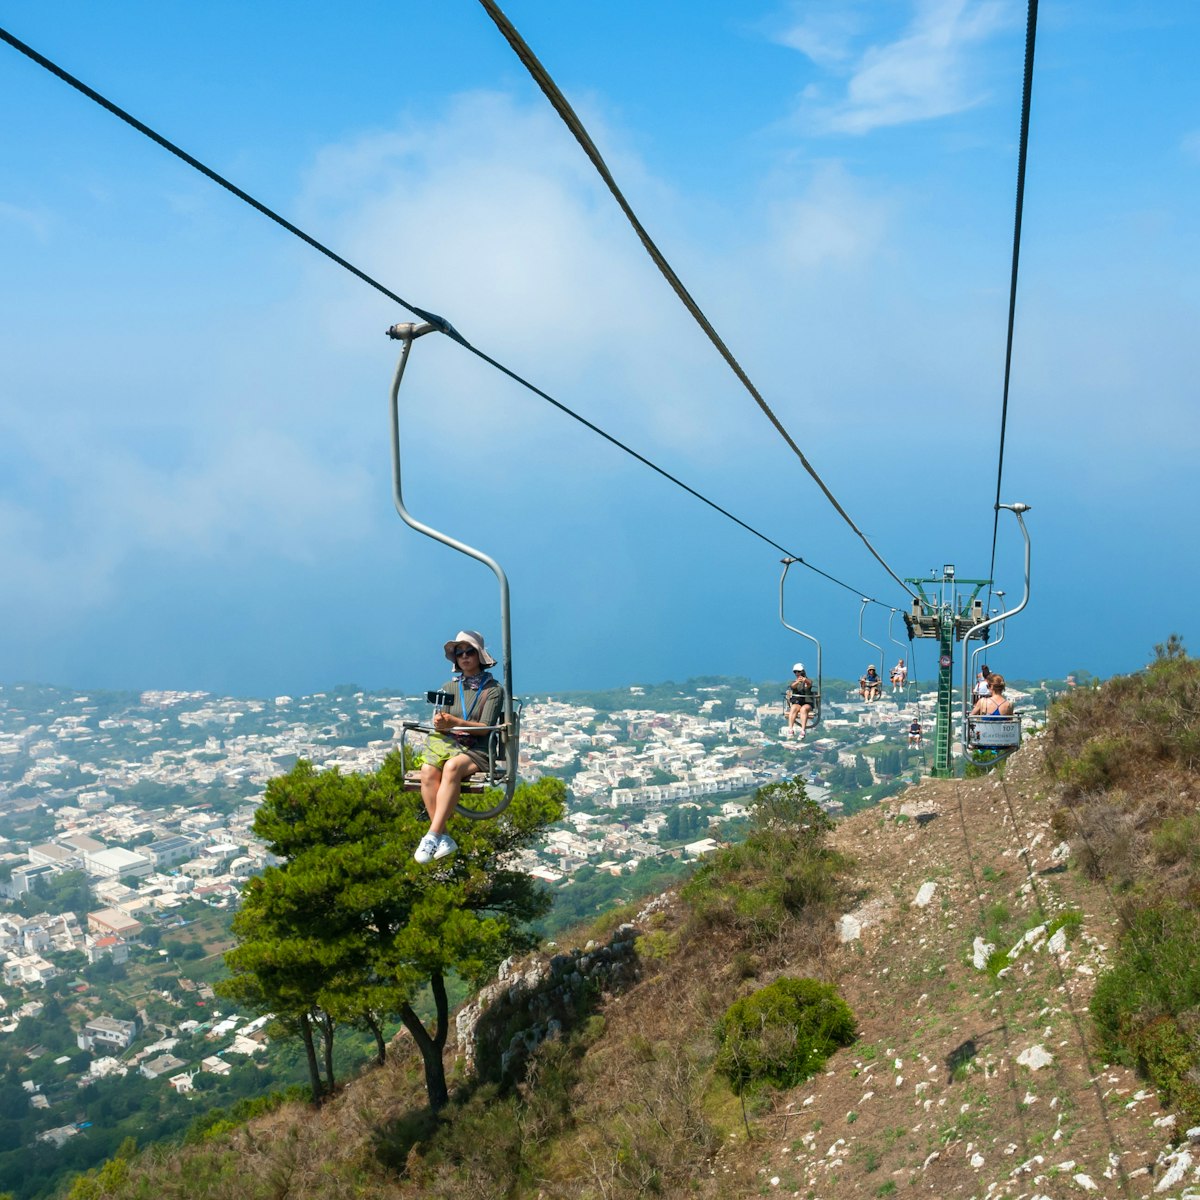 July 29, 2018: People riding up the mountain chair lift in Capri.
1158732217
above, adventure, aerial, amalfi, anacapri, cable, cableway, campania, capri, car, chair, chairlift, city, destination, europe, funicular, height, high, island, italian, italy, landscape, lift, mediterranean, monte, mount, mountain, naples, nature, people, sea, sky, solaro, summer, top, tour, tourism, tourist, touristic, town, transport, transportation, travel, trip, vacation, view, way